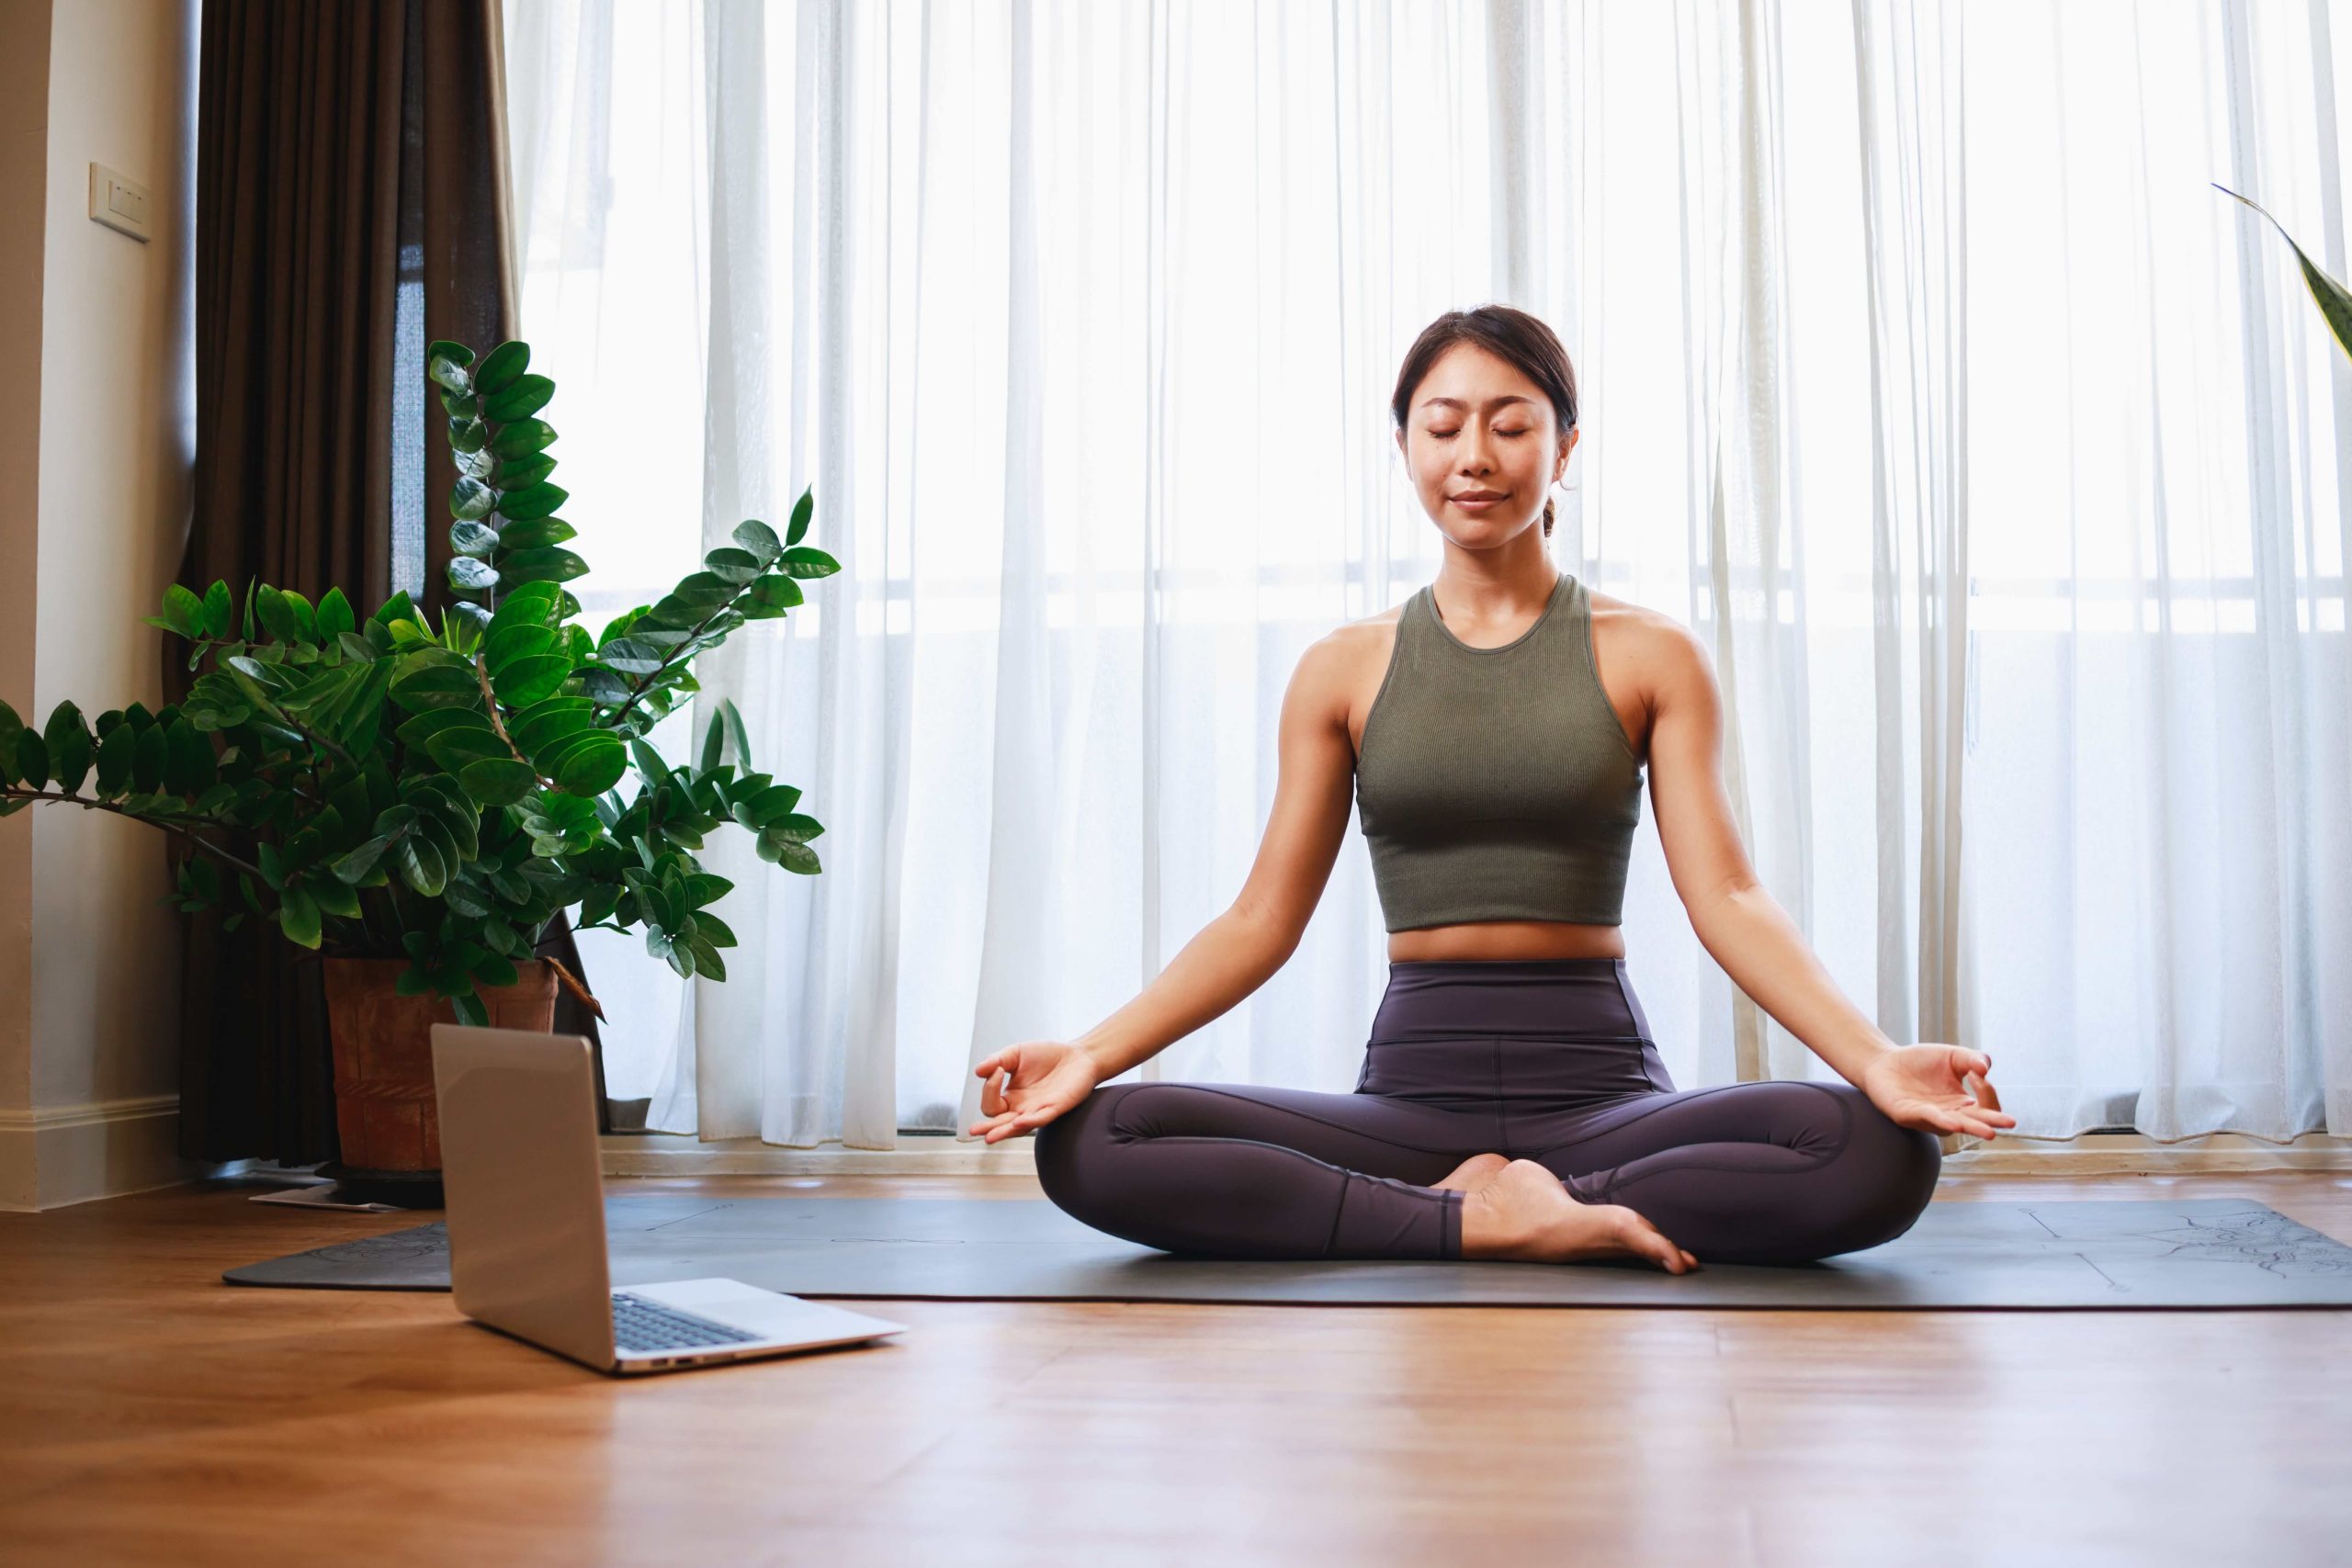 On Starting Yoga as a New Hobby in your Home